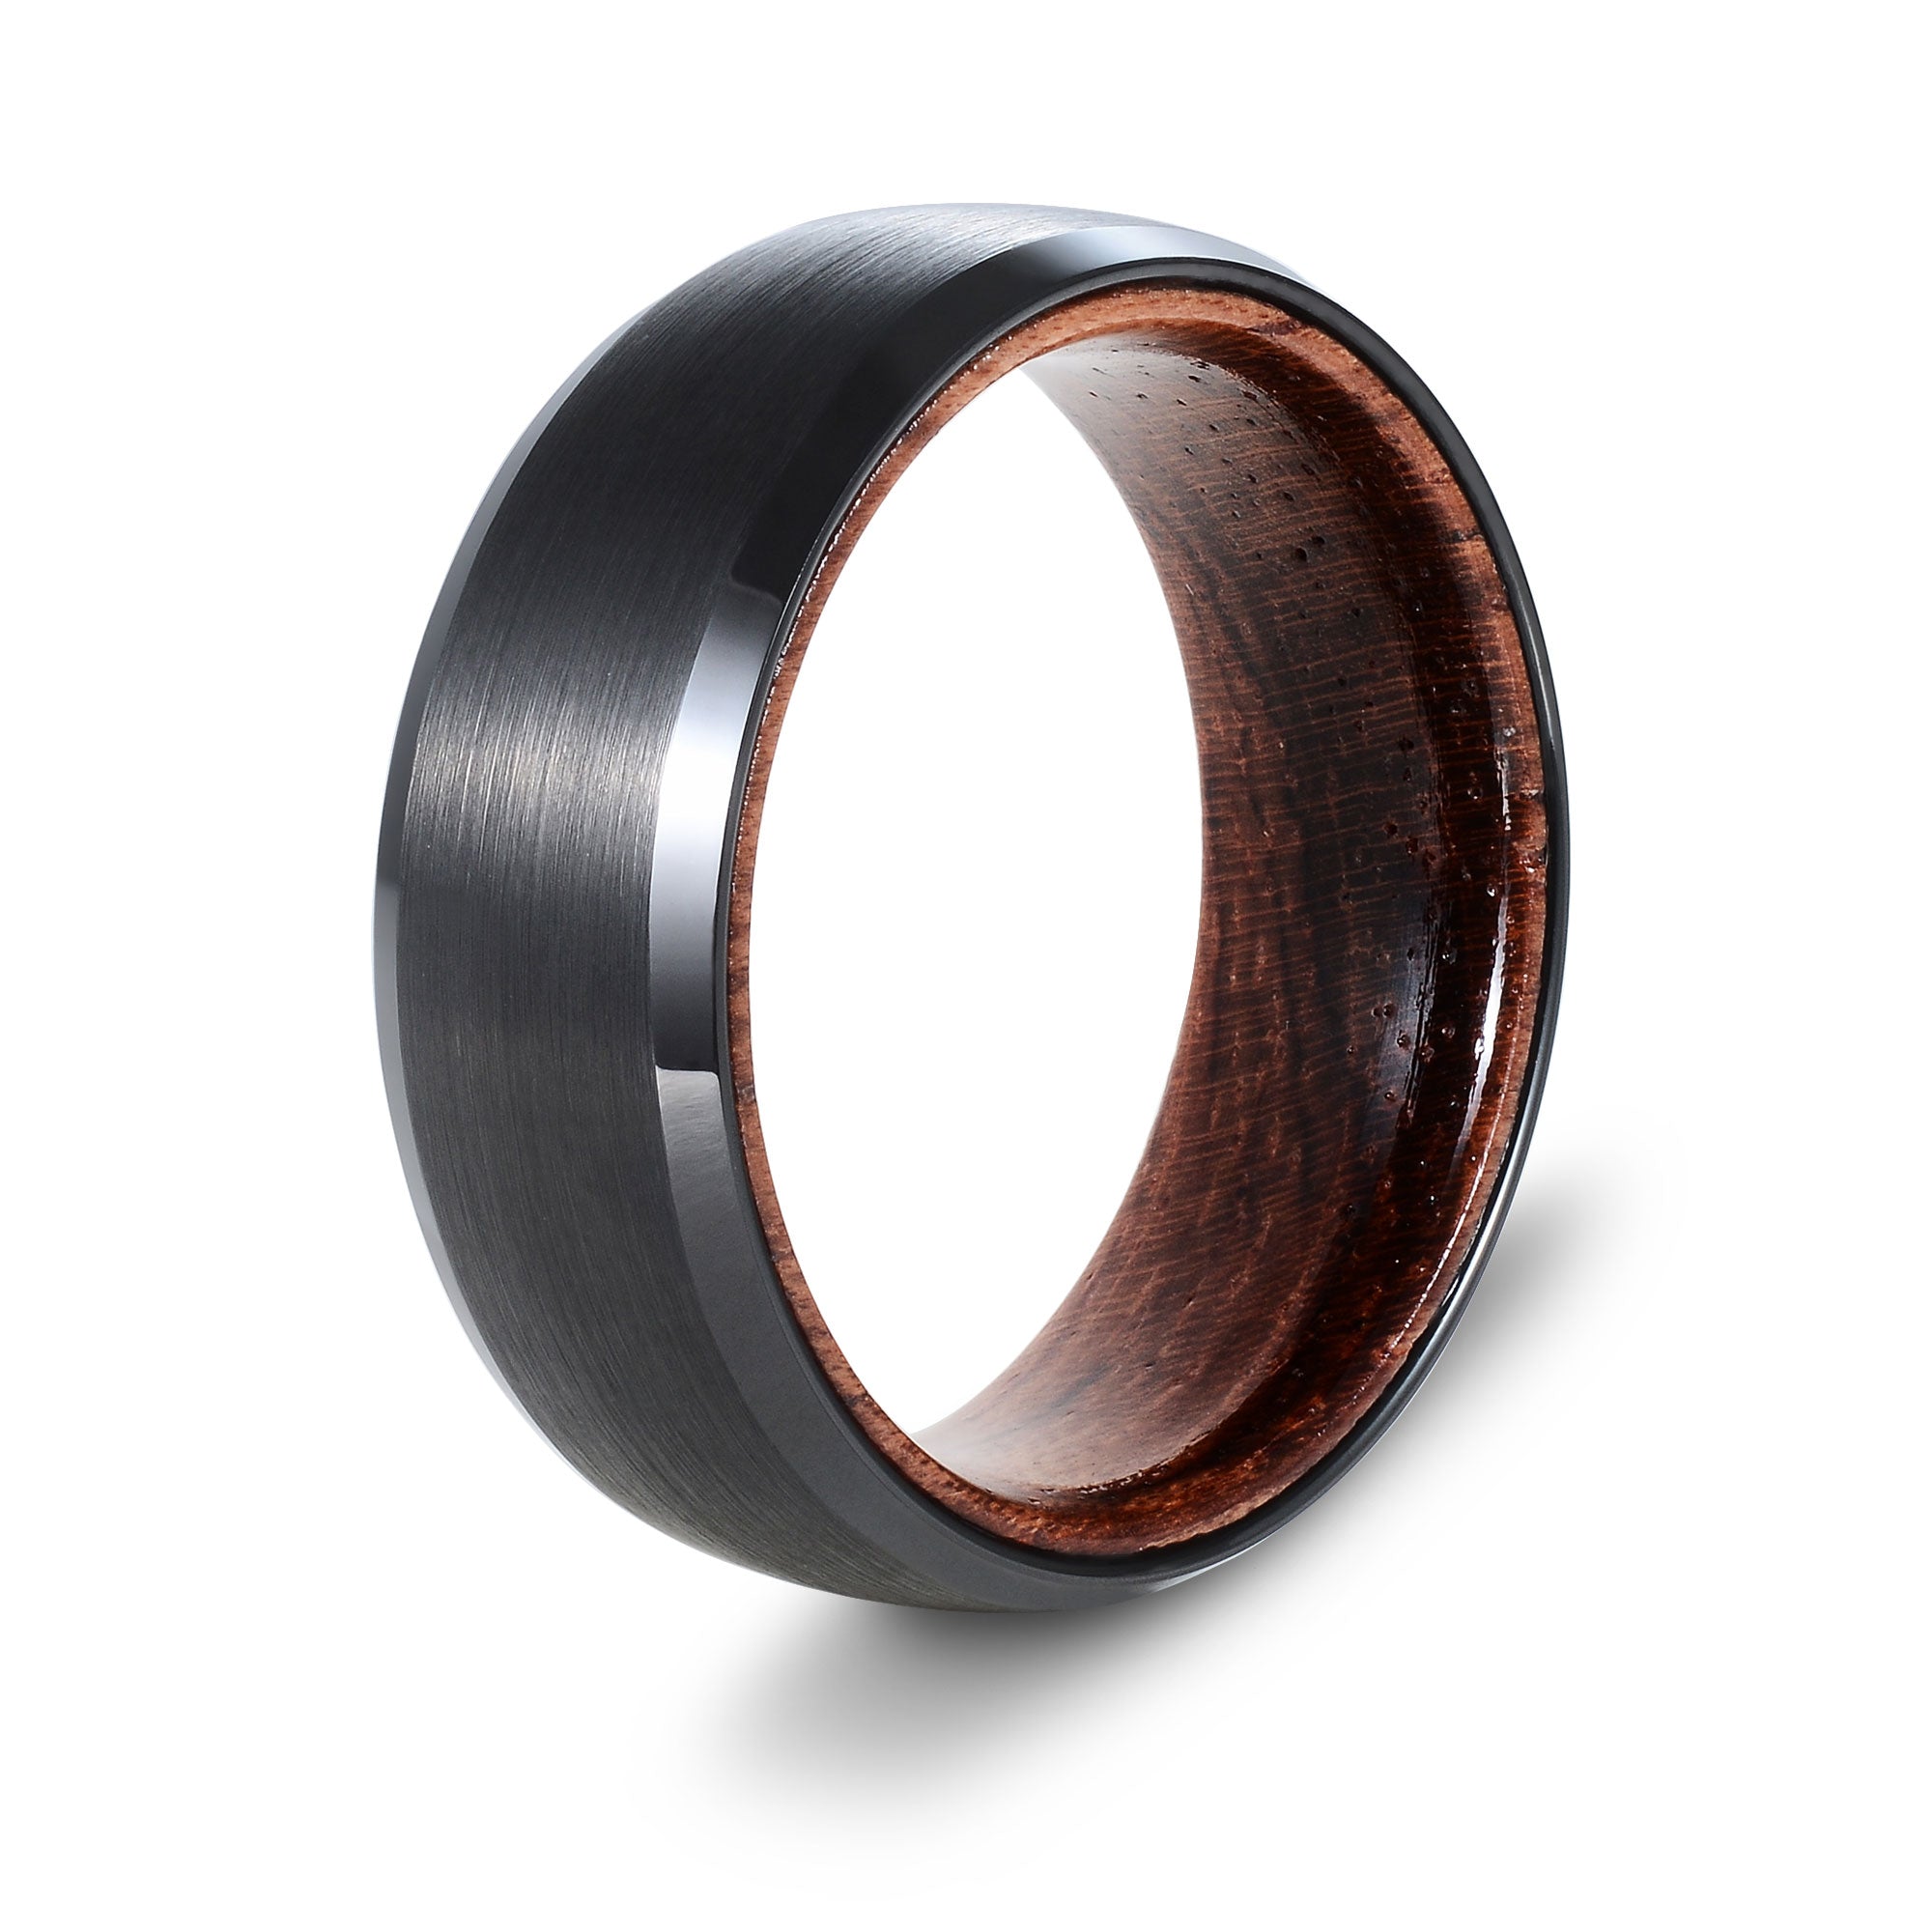 The Polished - Black Curved Brushed Tungsten Koa Wood Ring